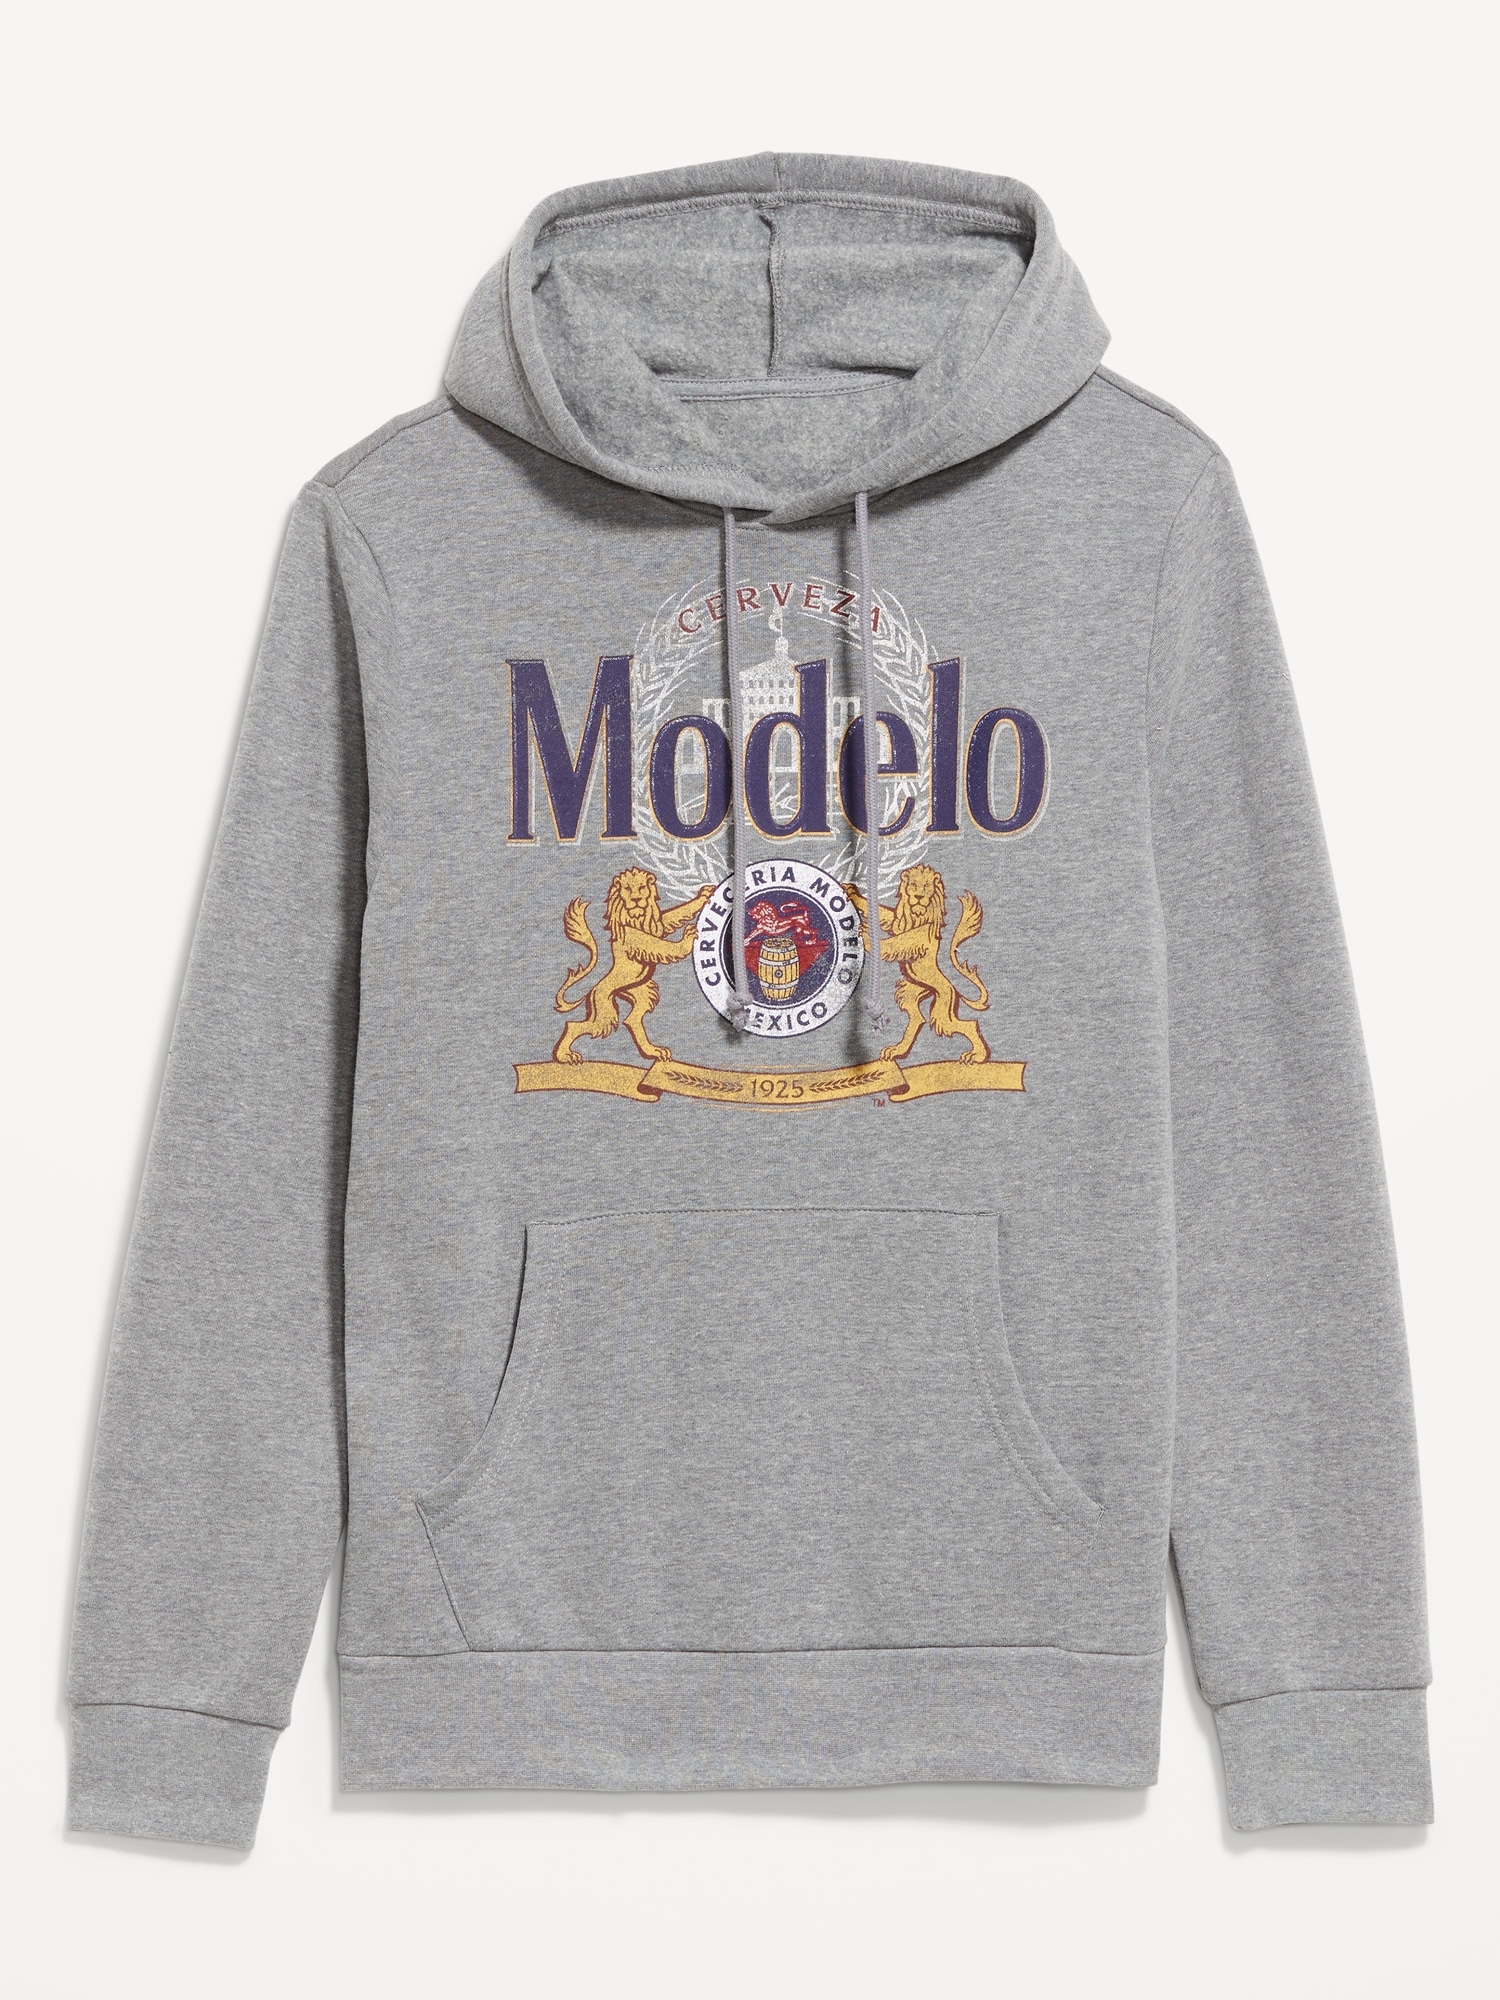 Cerveza Modelo Gender-Neutral Hoodie for Adults